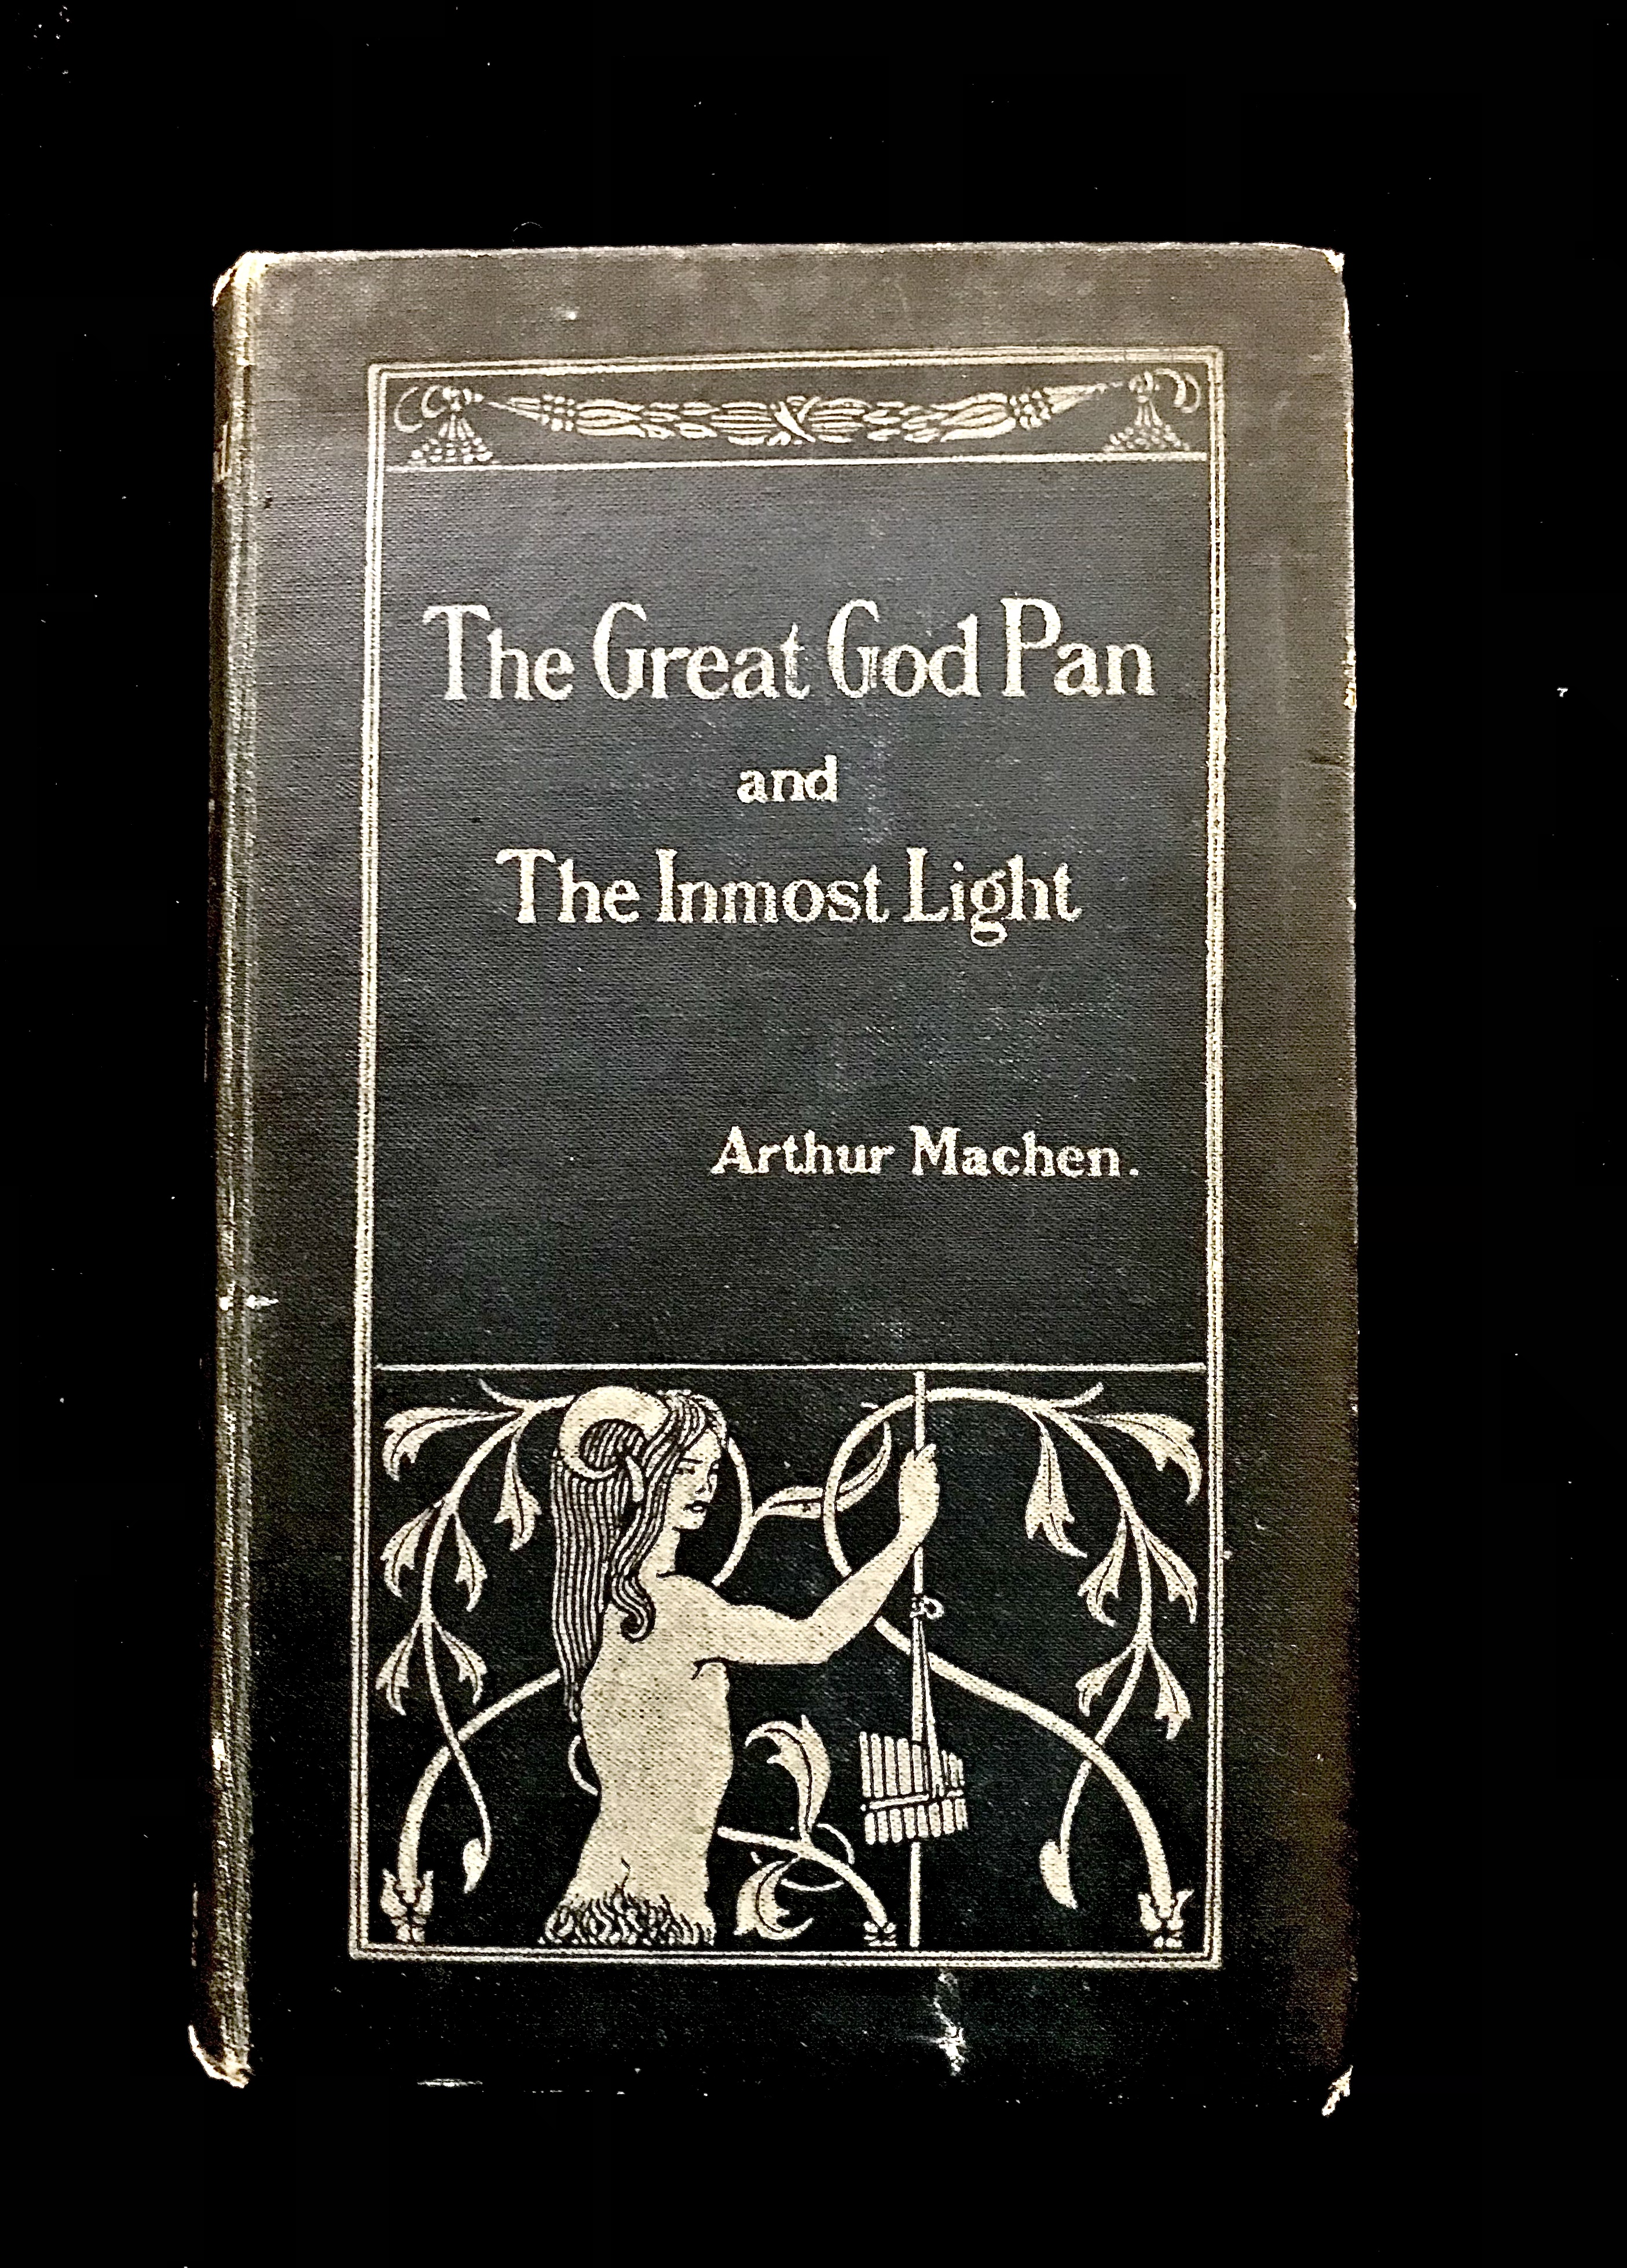 The Great God Pan & The Inmost Light by Arthur Machen